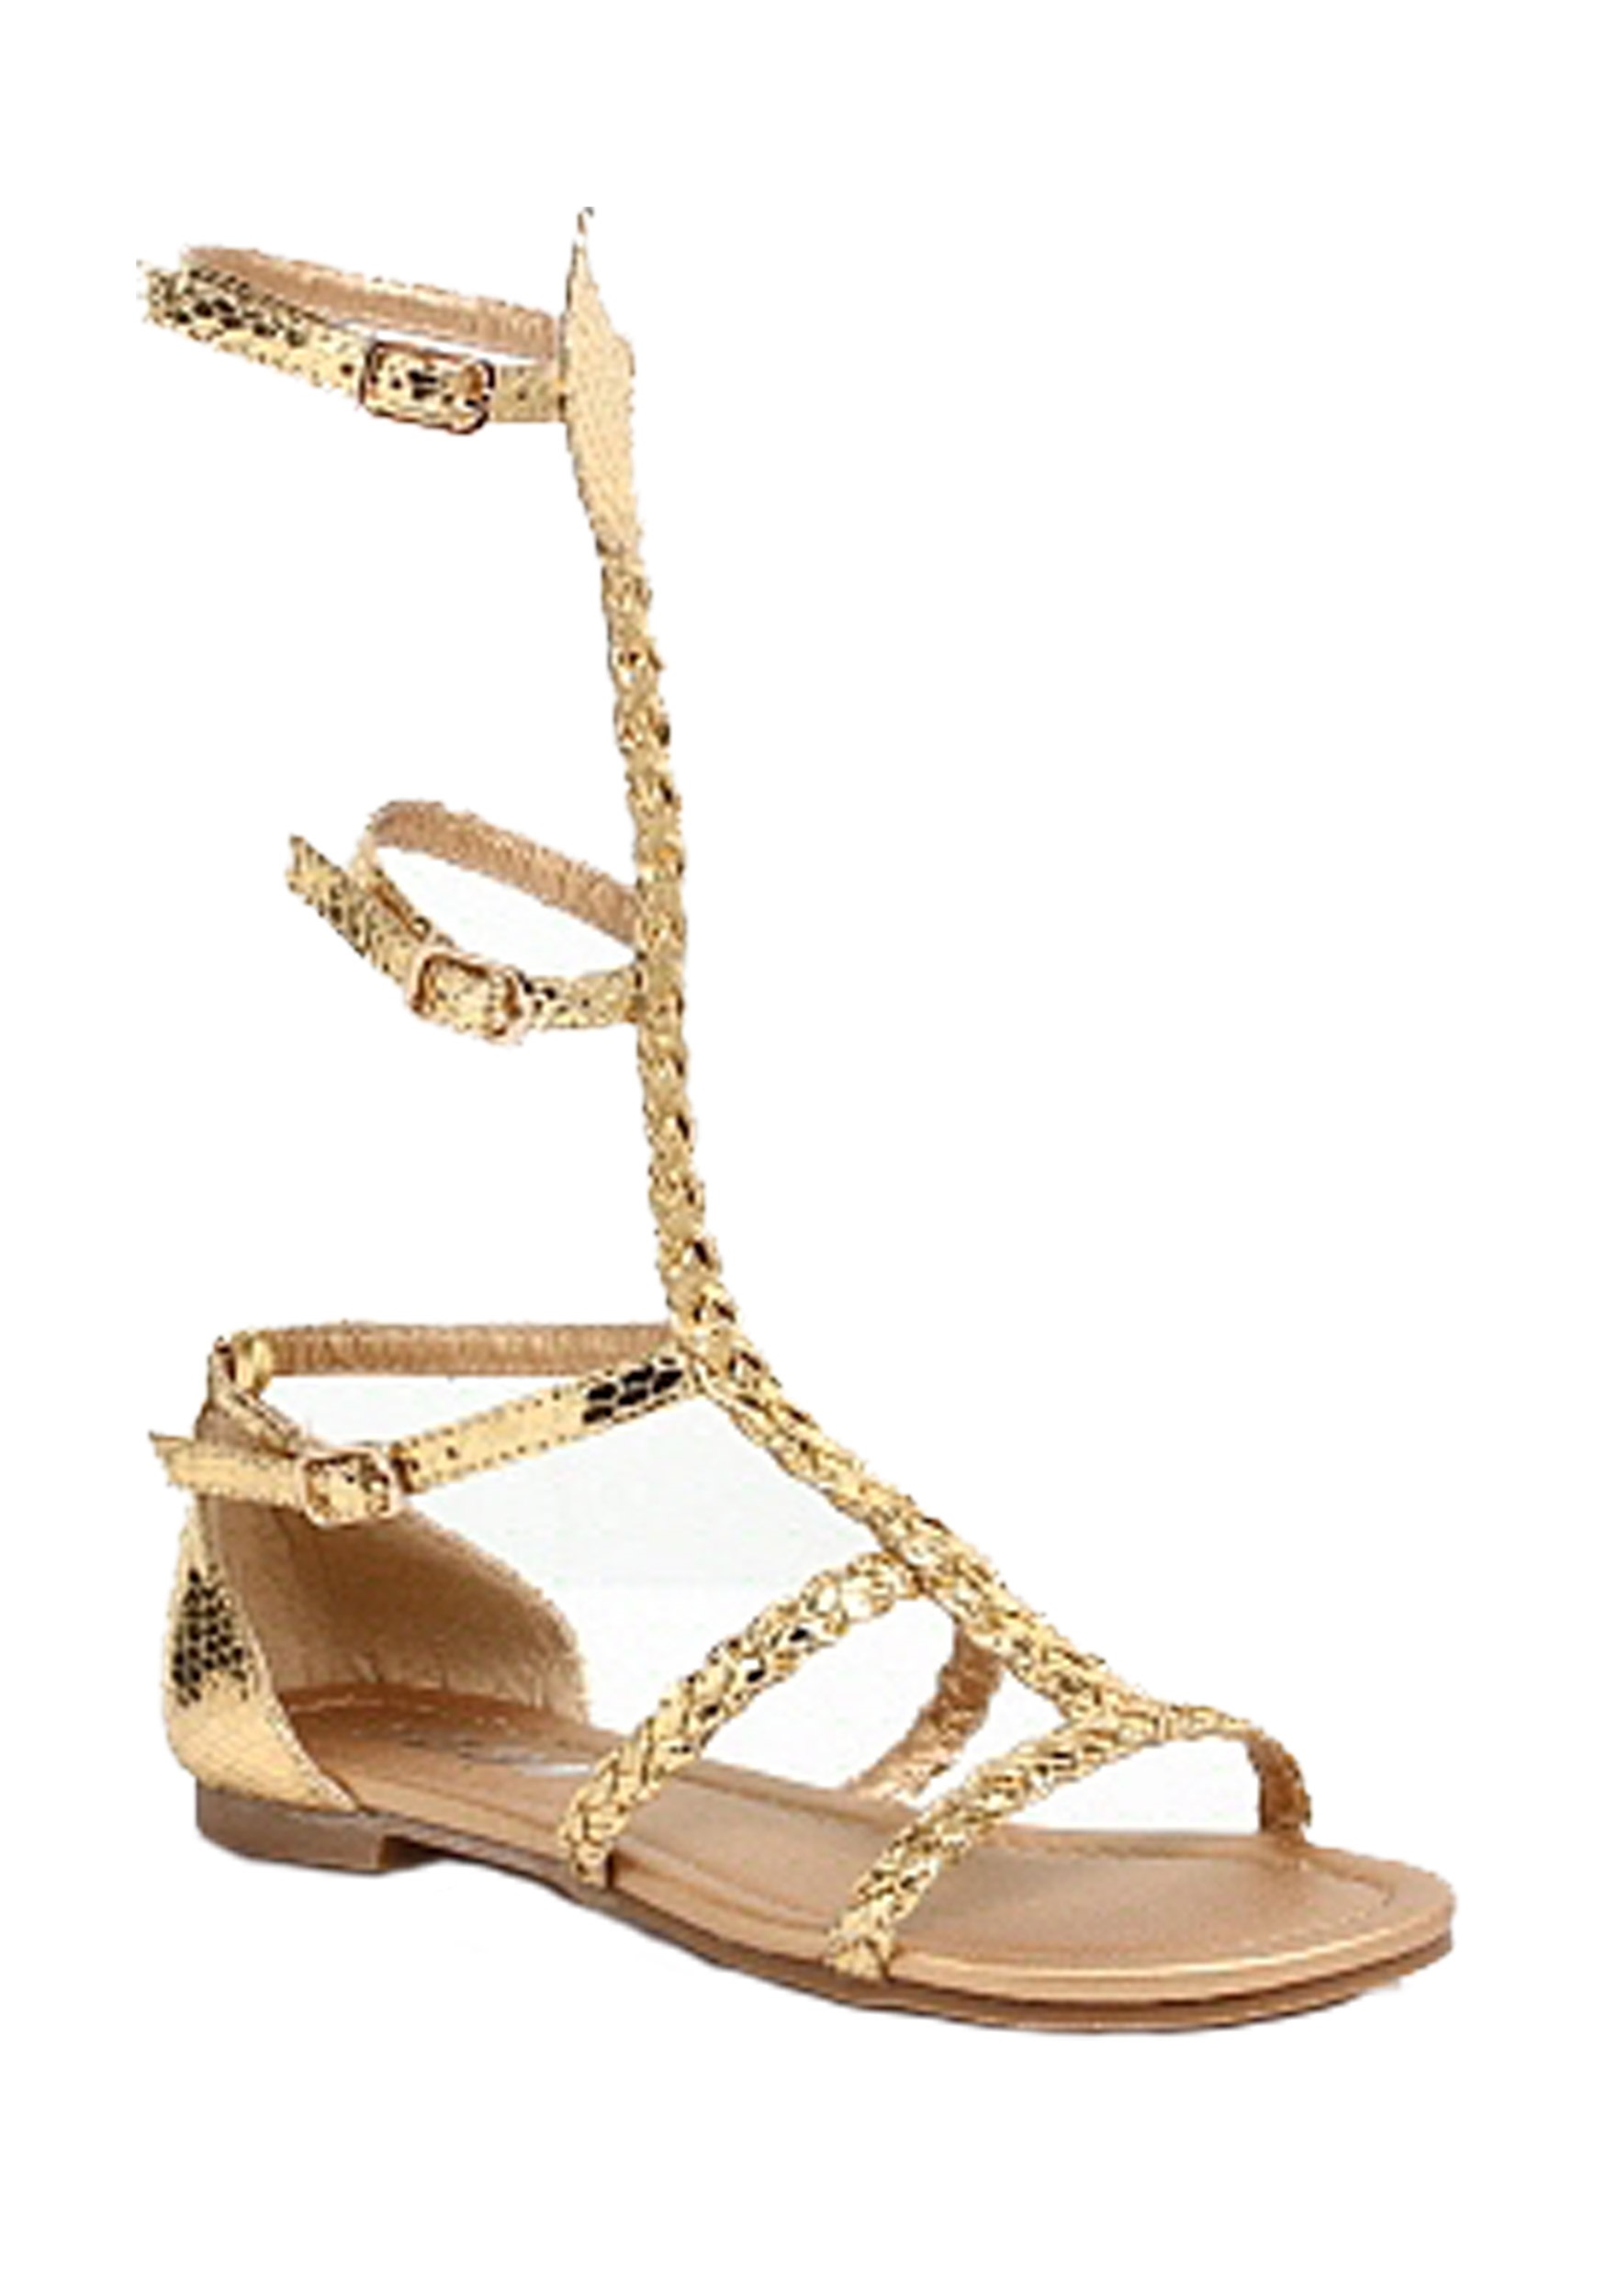 Egyptian Gold Child Costume Sandals